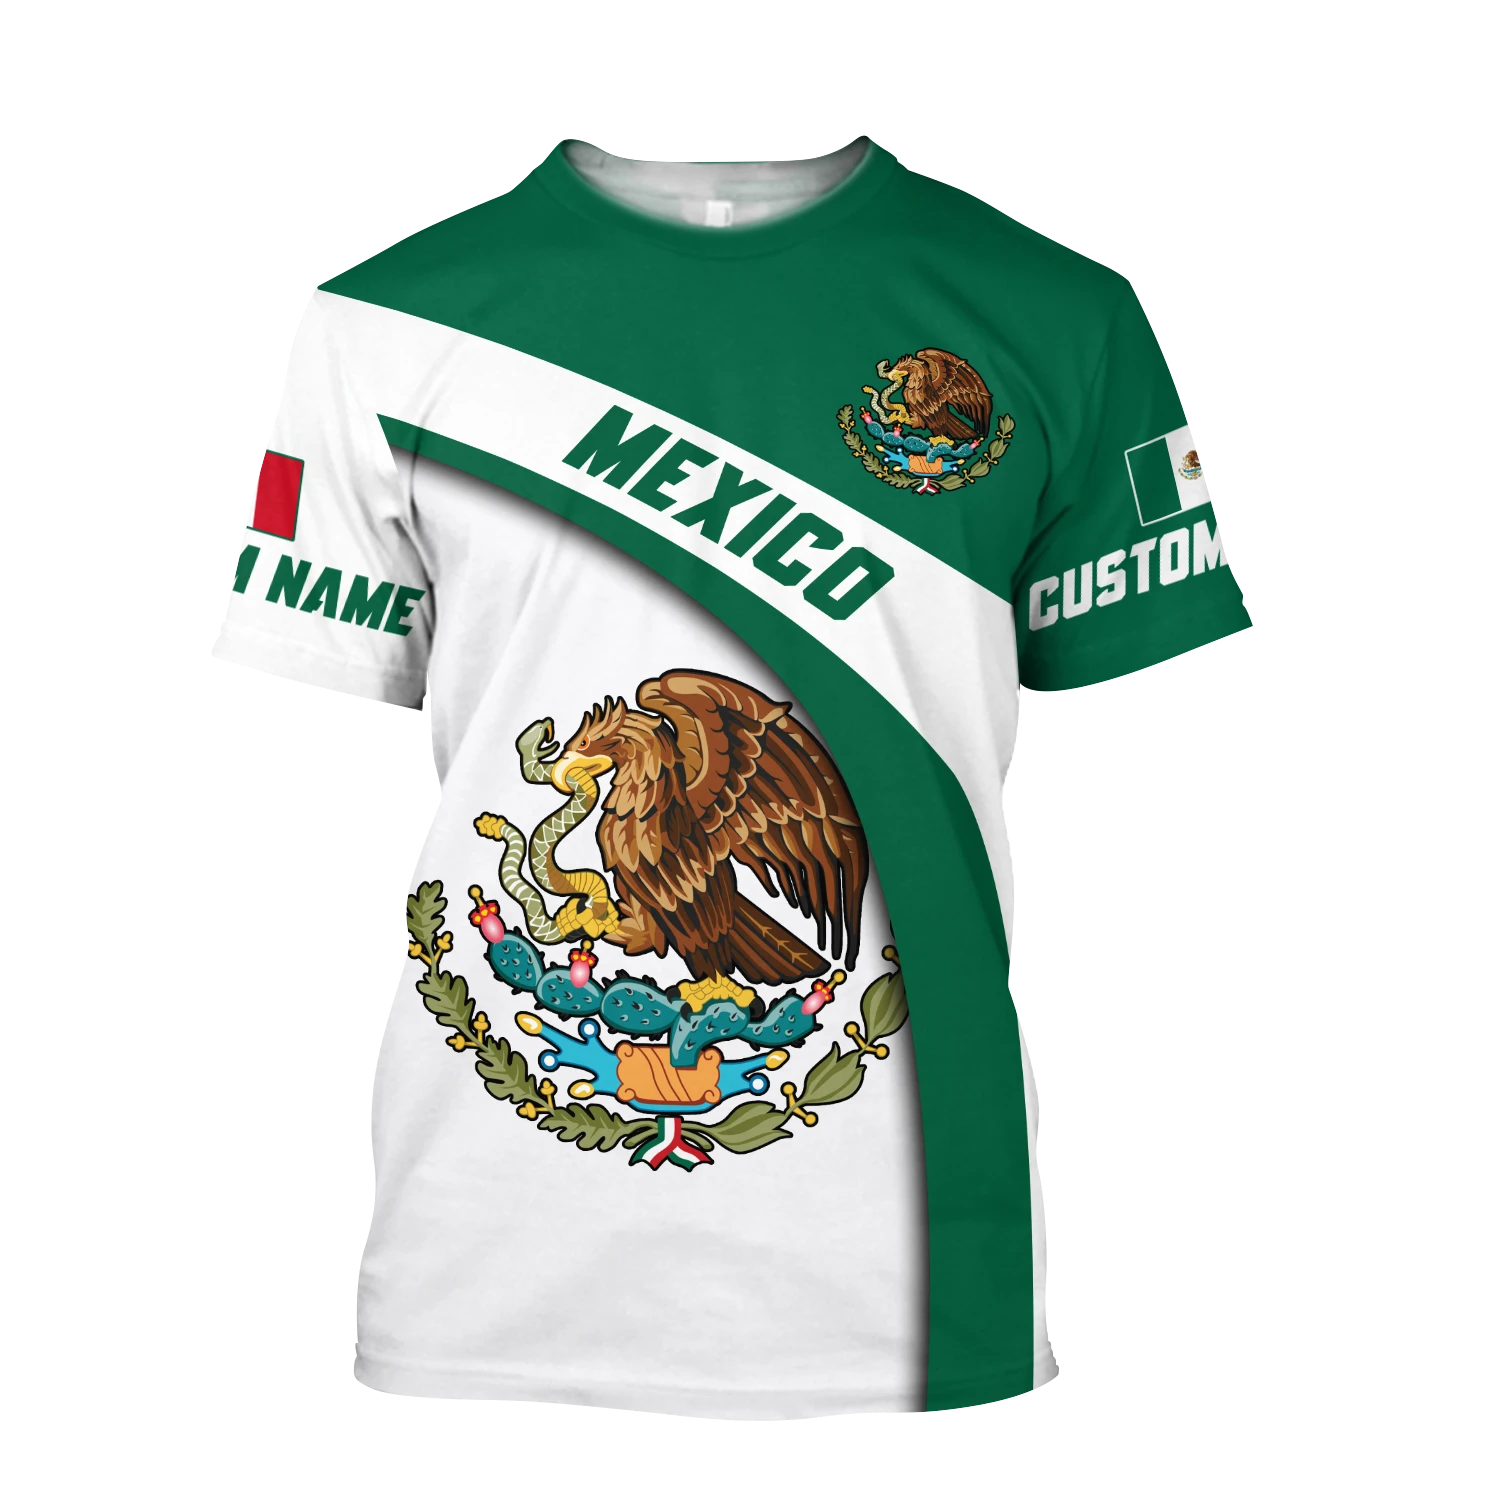 Mexico Combo T-shirt and Short 3D All Over Printed no2– Tmarc Tee